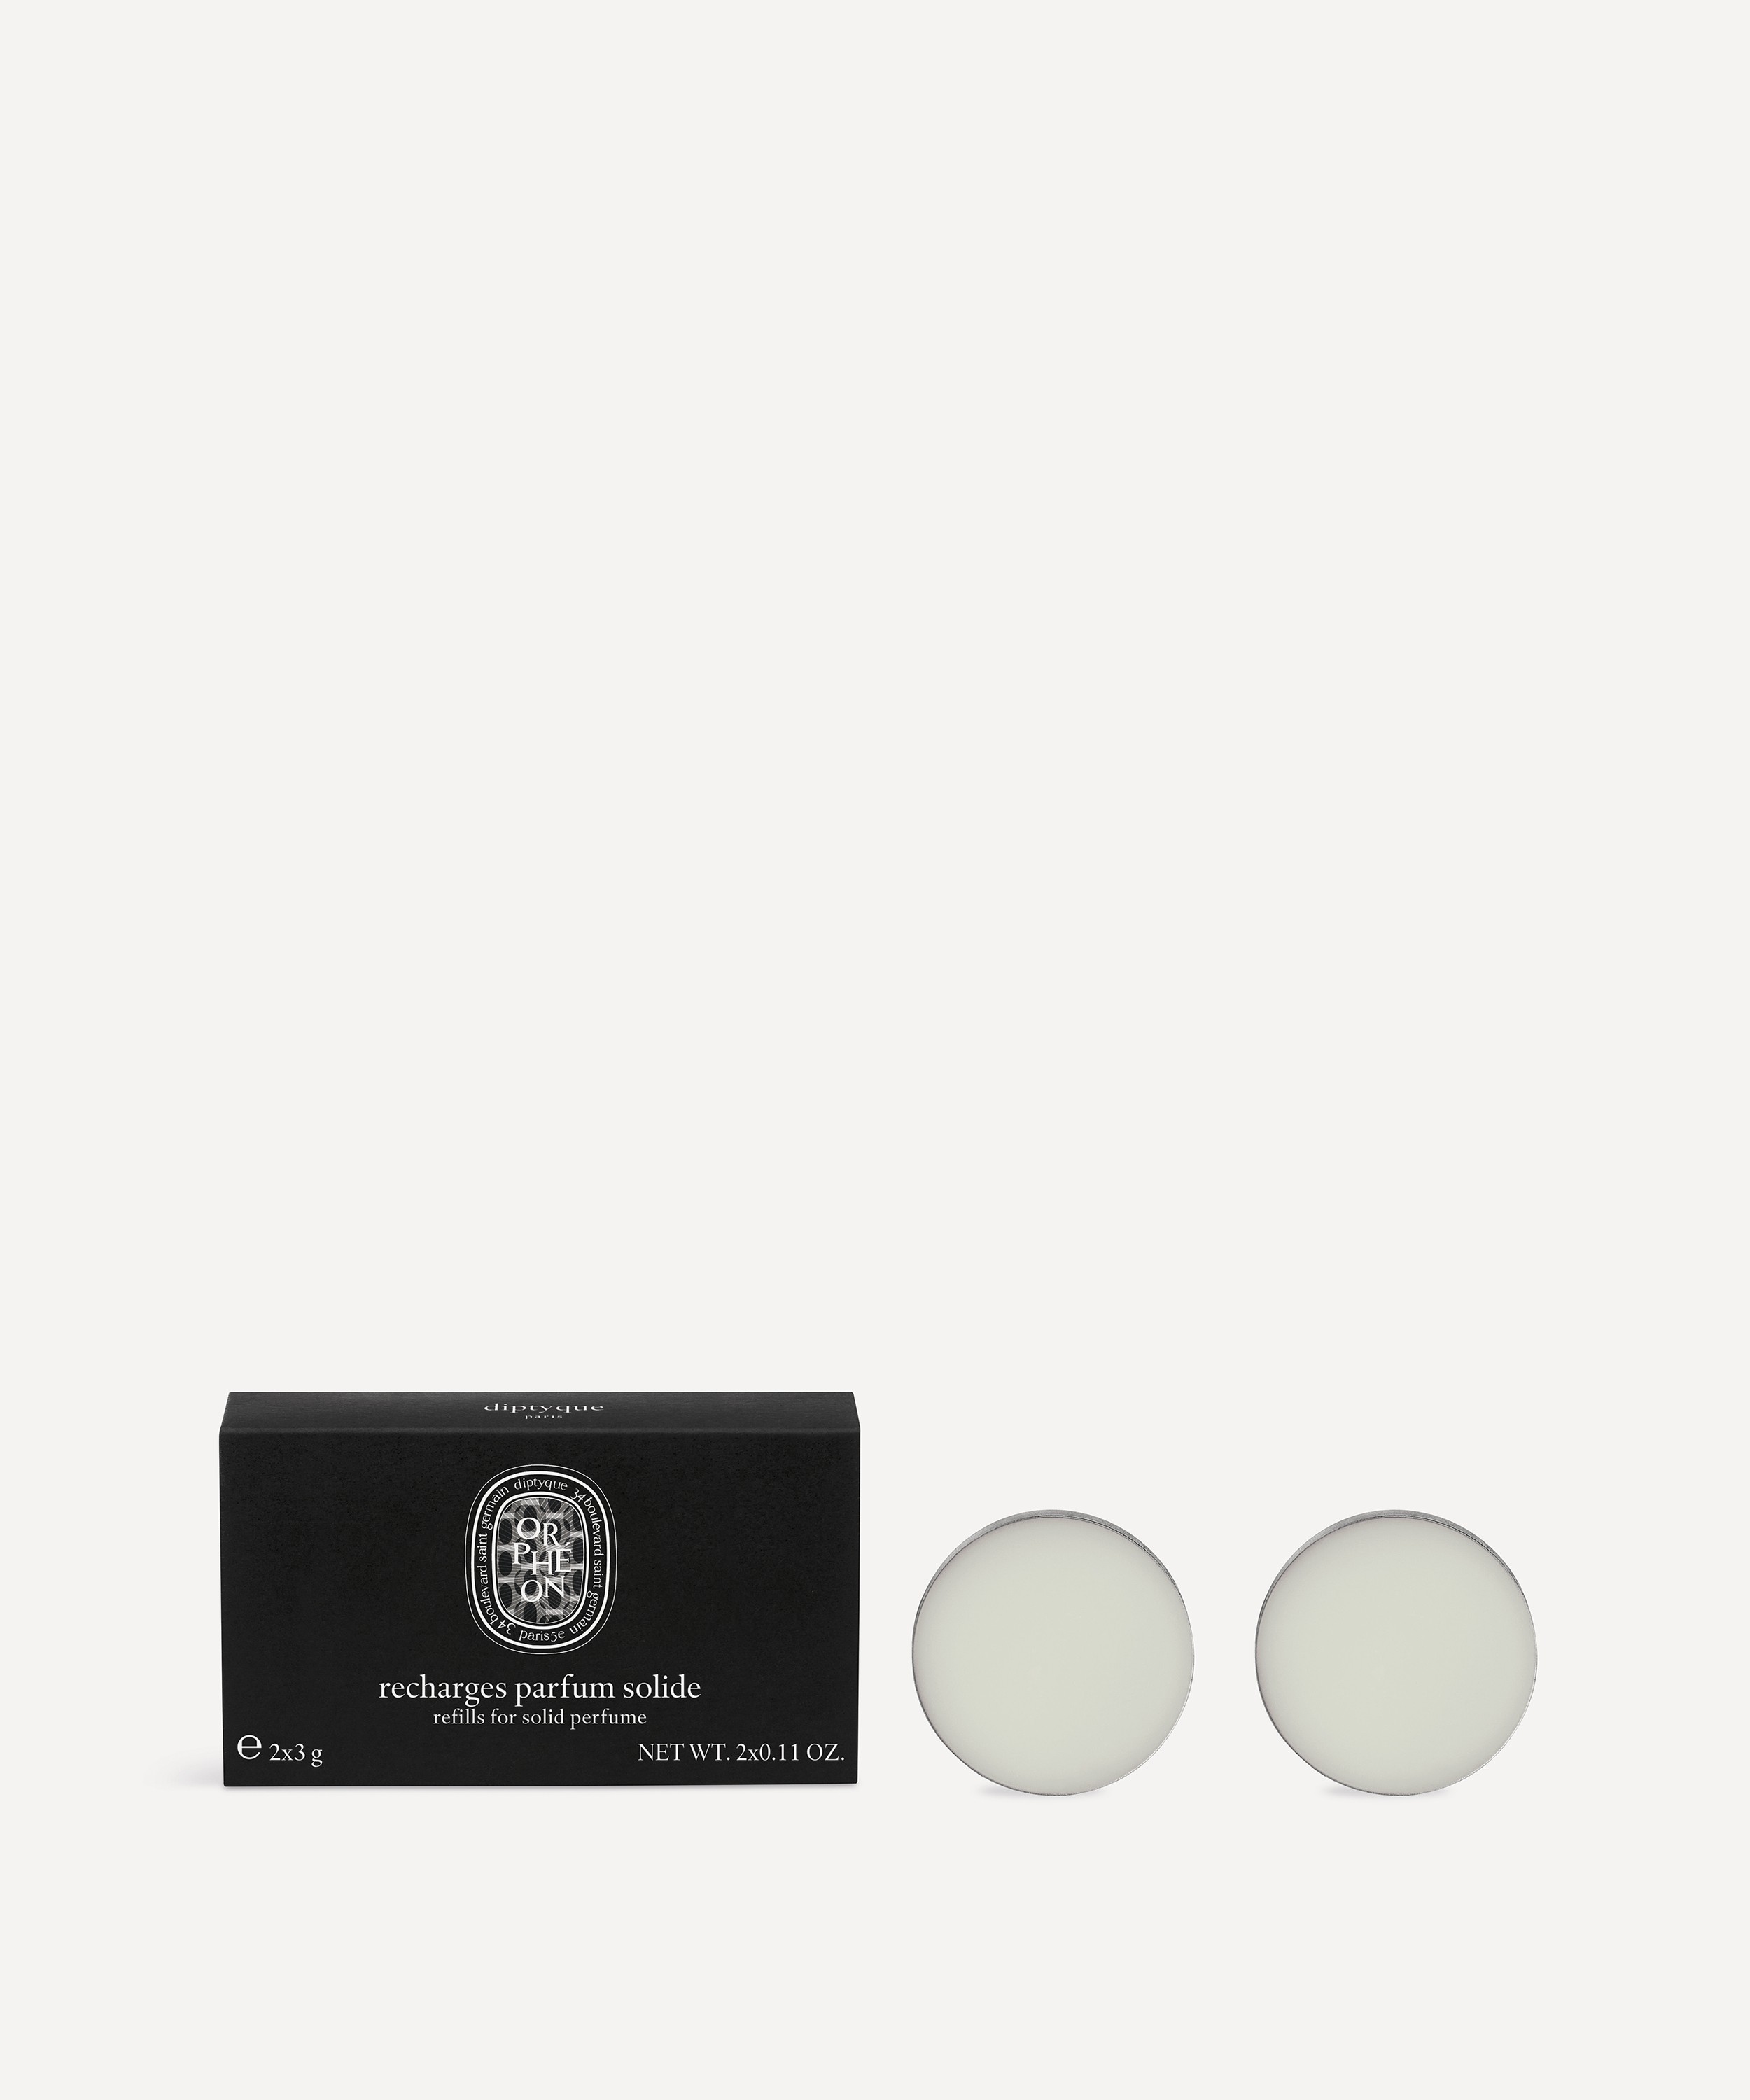 Diptyque - Orphéon Solid Perfume Refill 2 x 3g